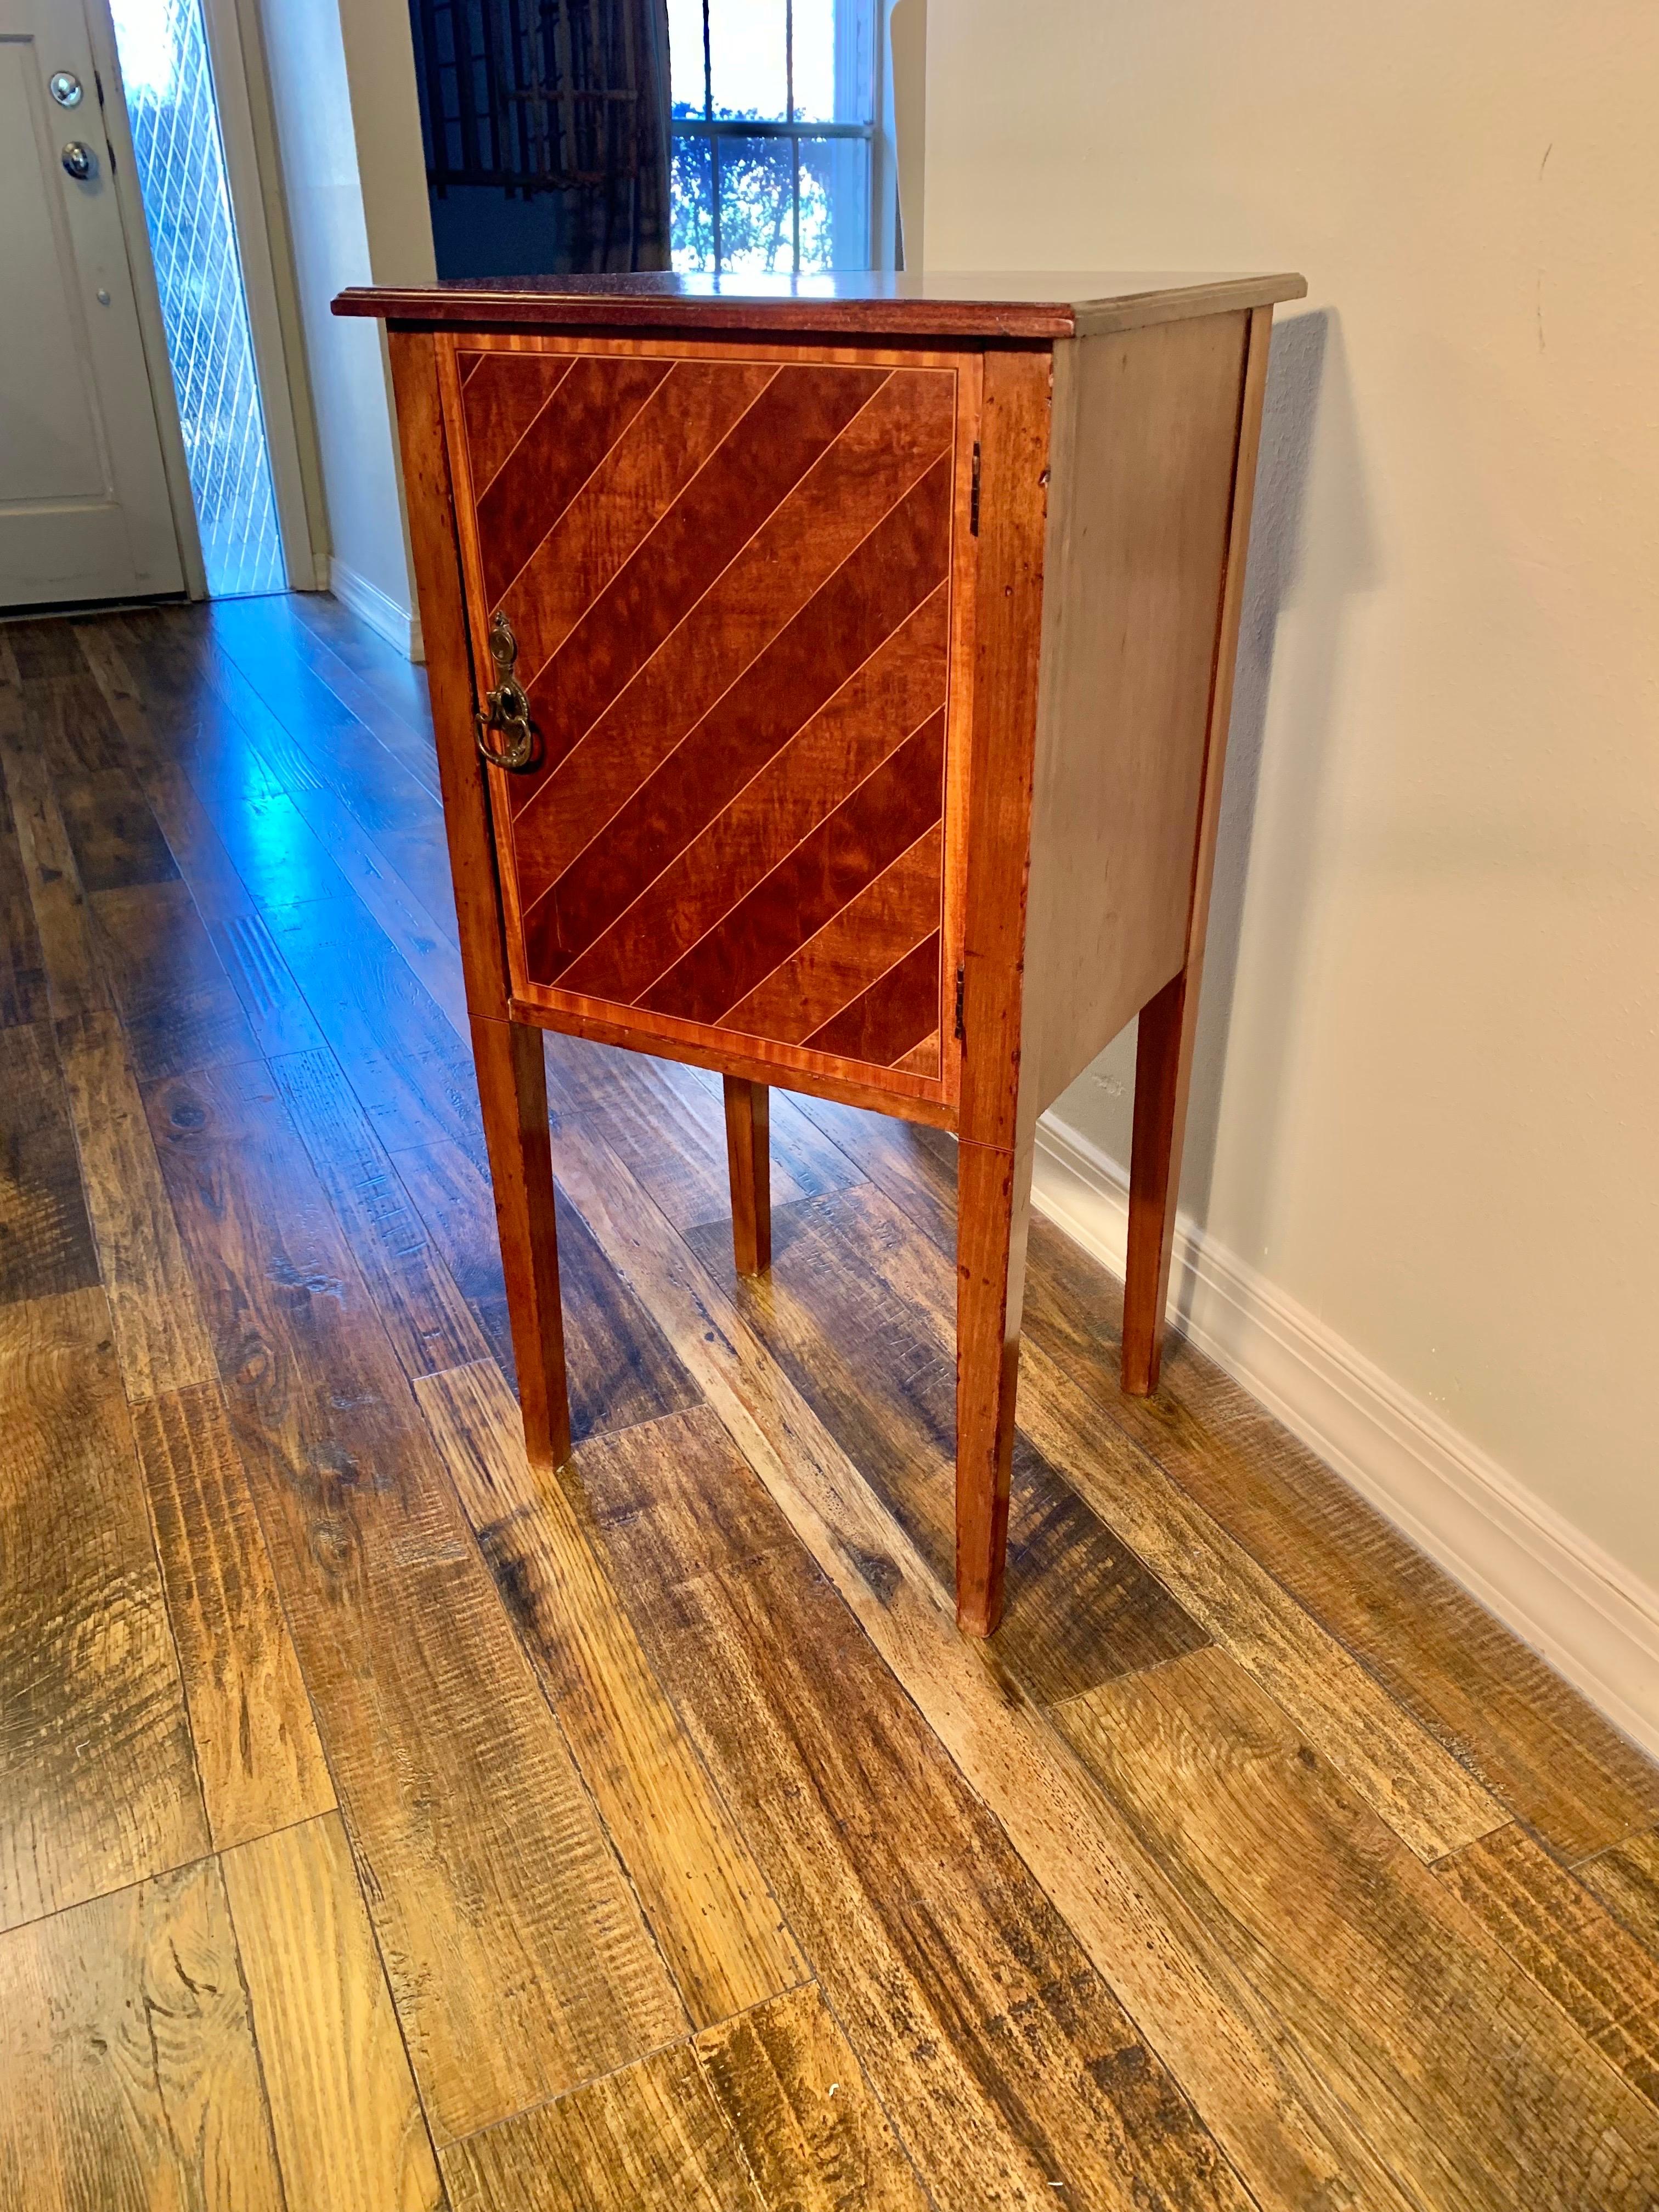 Found in England, this Cabinet or Side Table was crafted by English artisans from old growth walnut in the 1890's. The piece features an inlay wood banded top resting above an inlay wood door that opens to reveal two shelves for storage. The cabinet